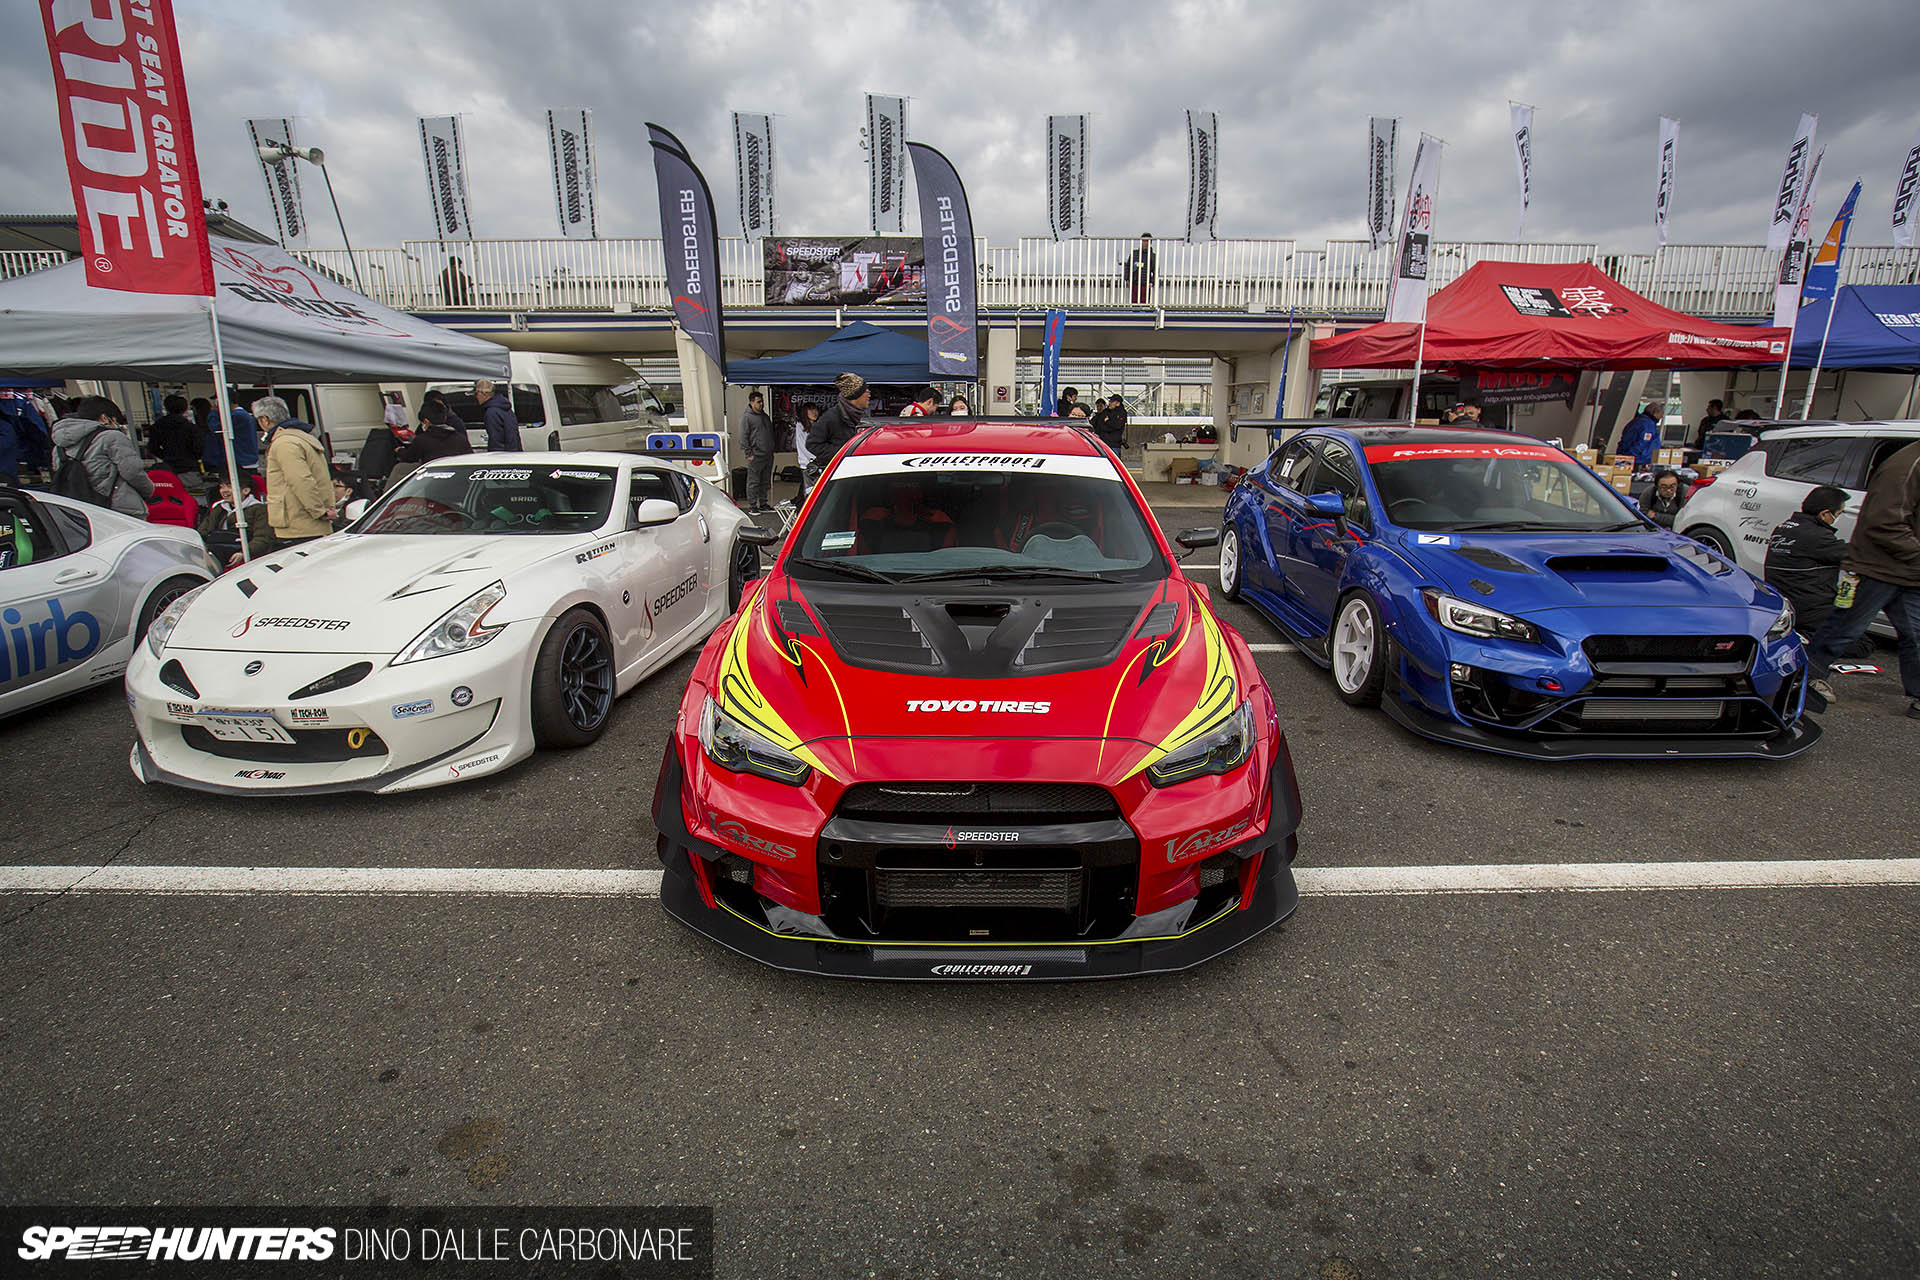 The Hyper Meeting Reloaded - Speedhunters